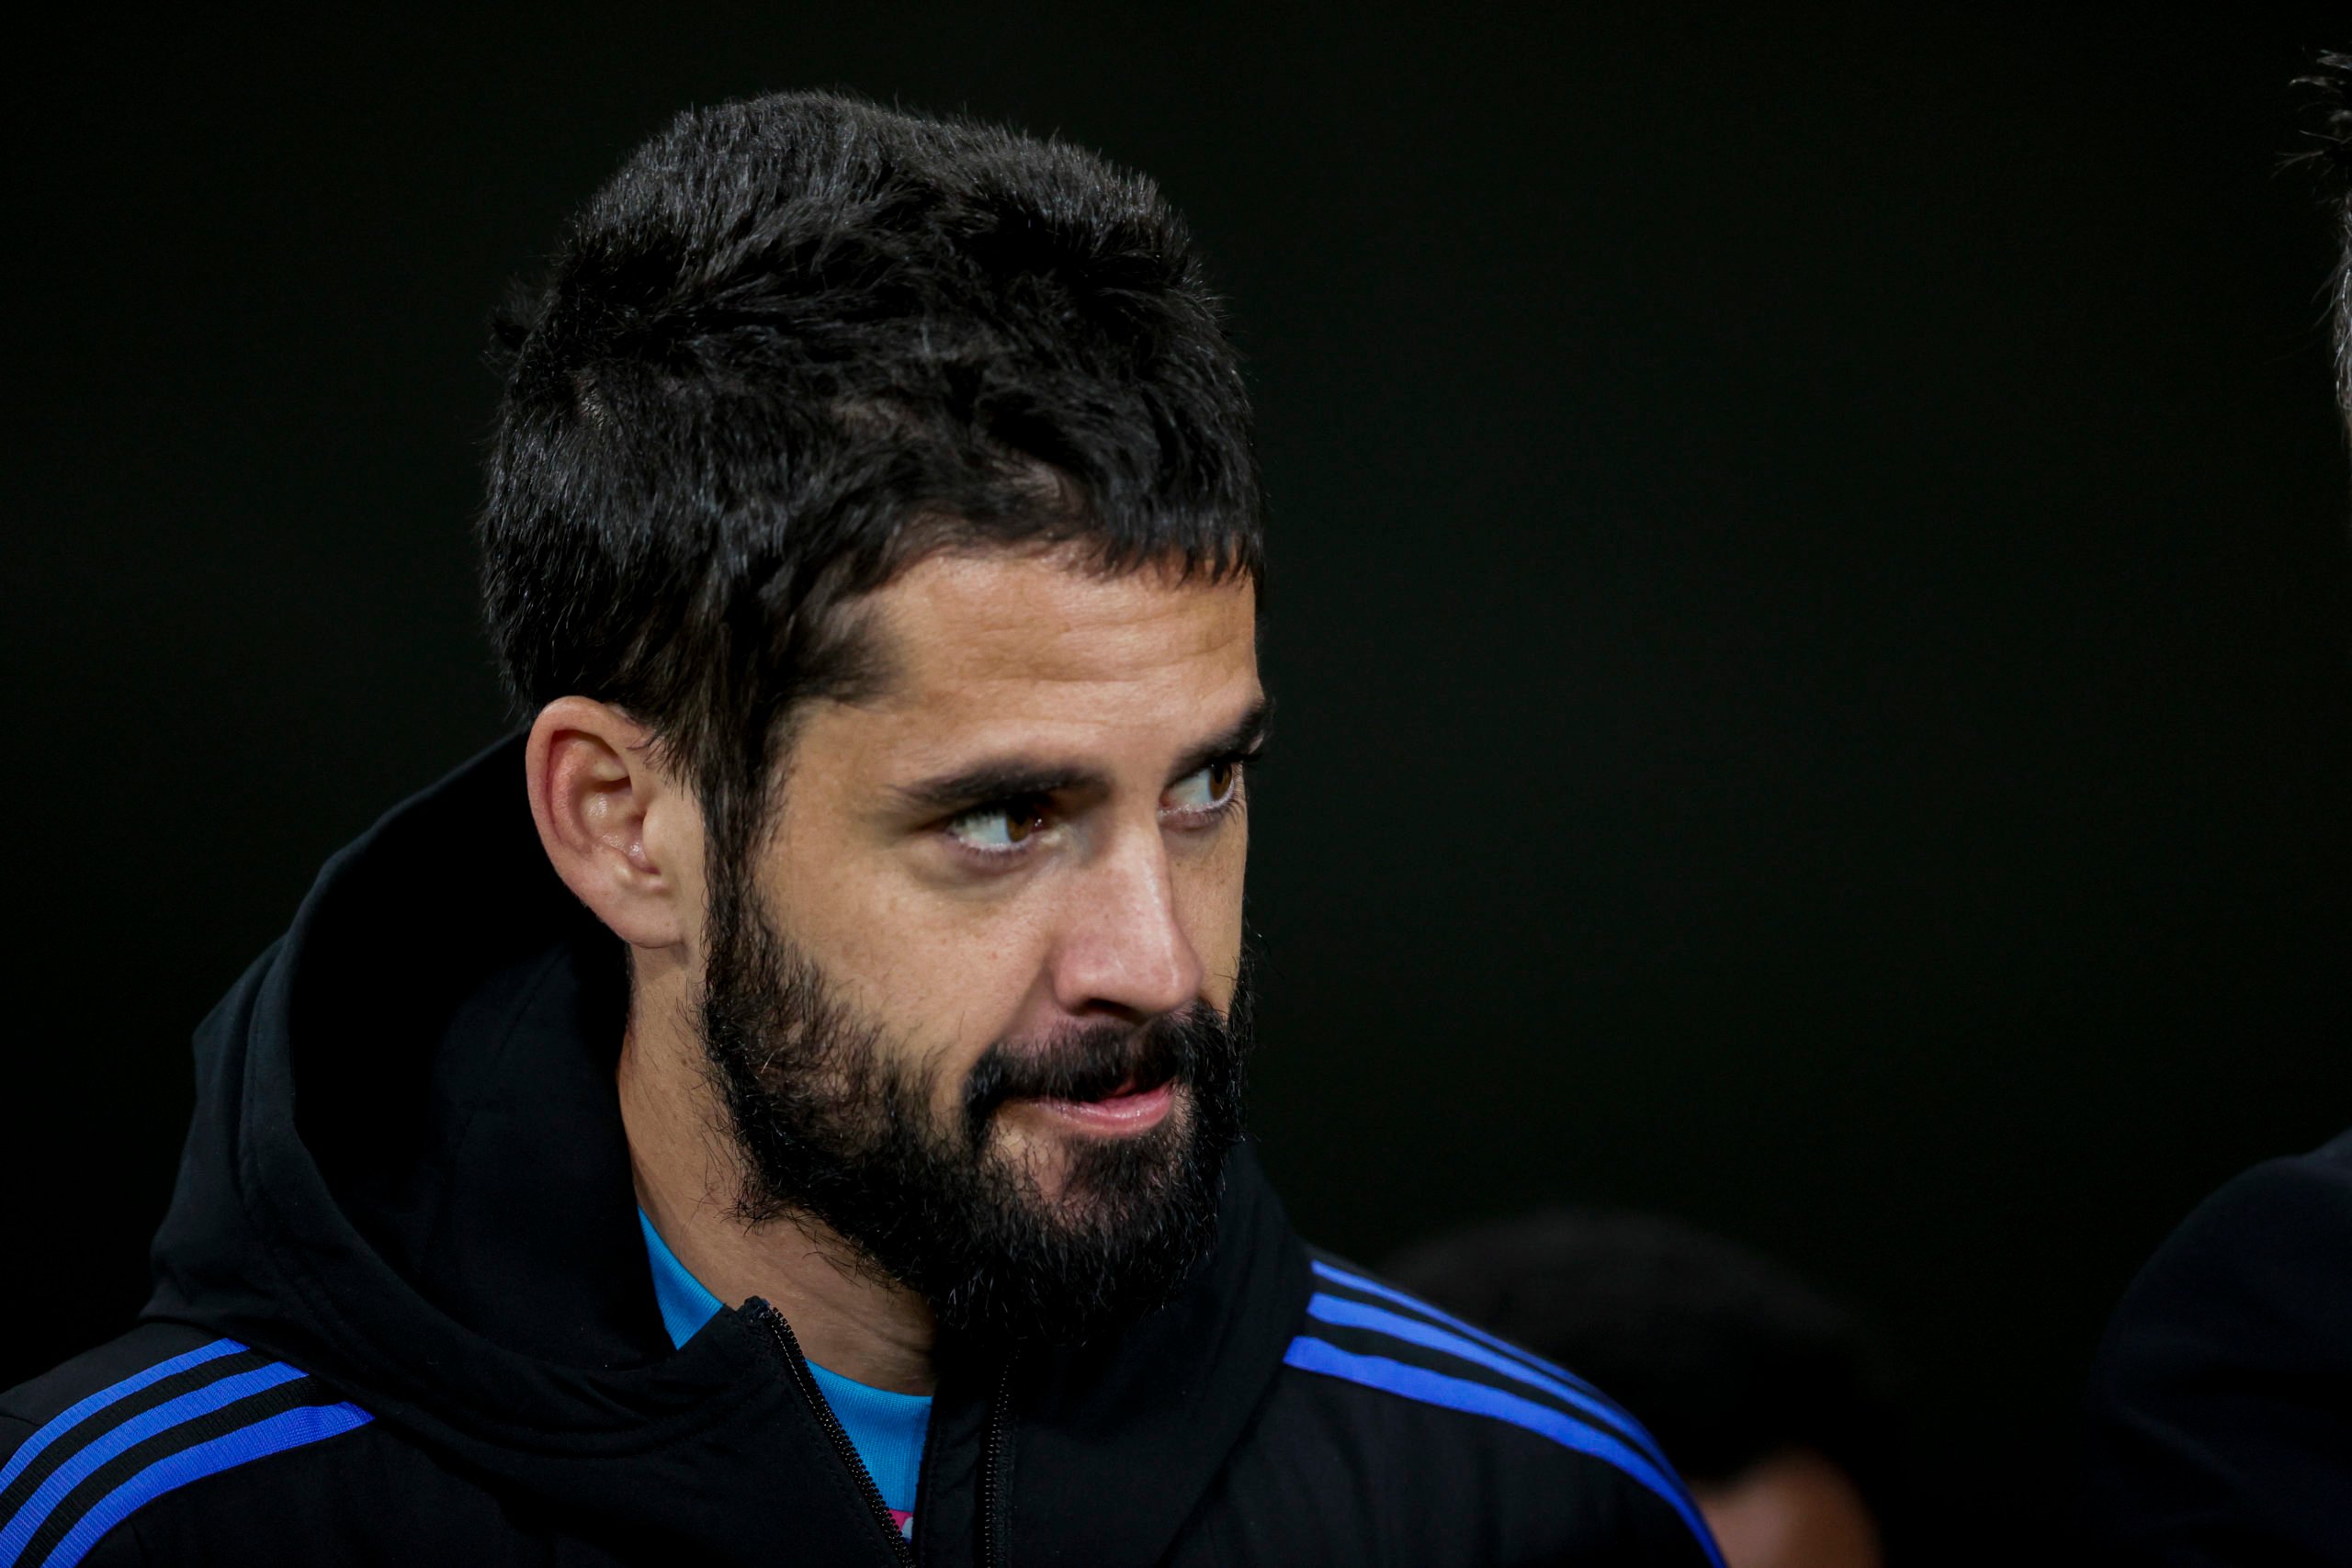 West Ham are allegedly desperate to sign Isco from Real Madrid this summer